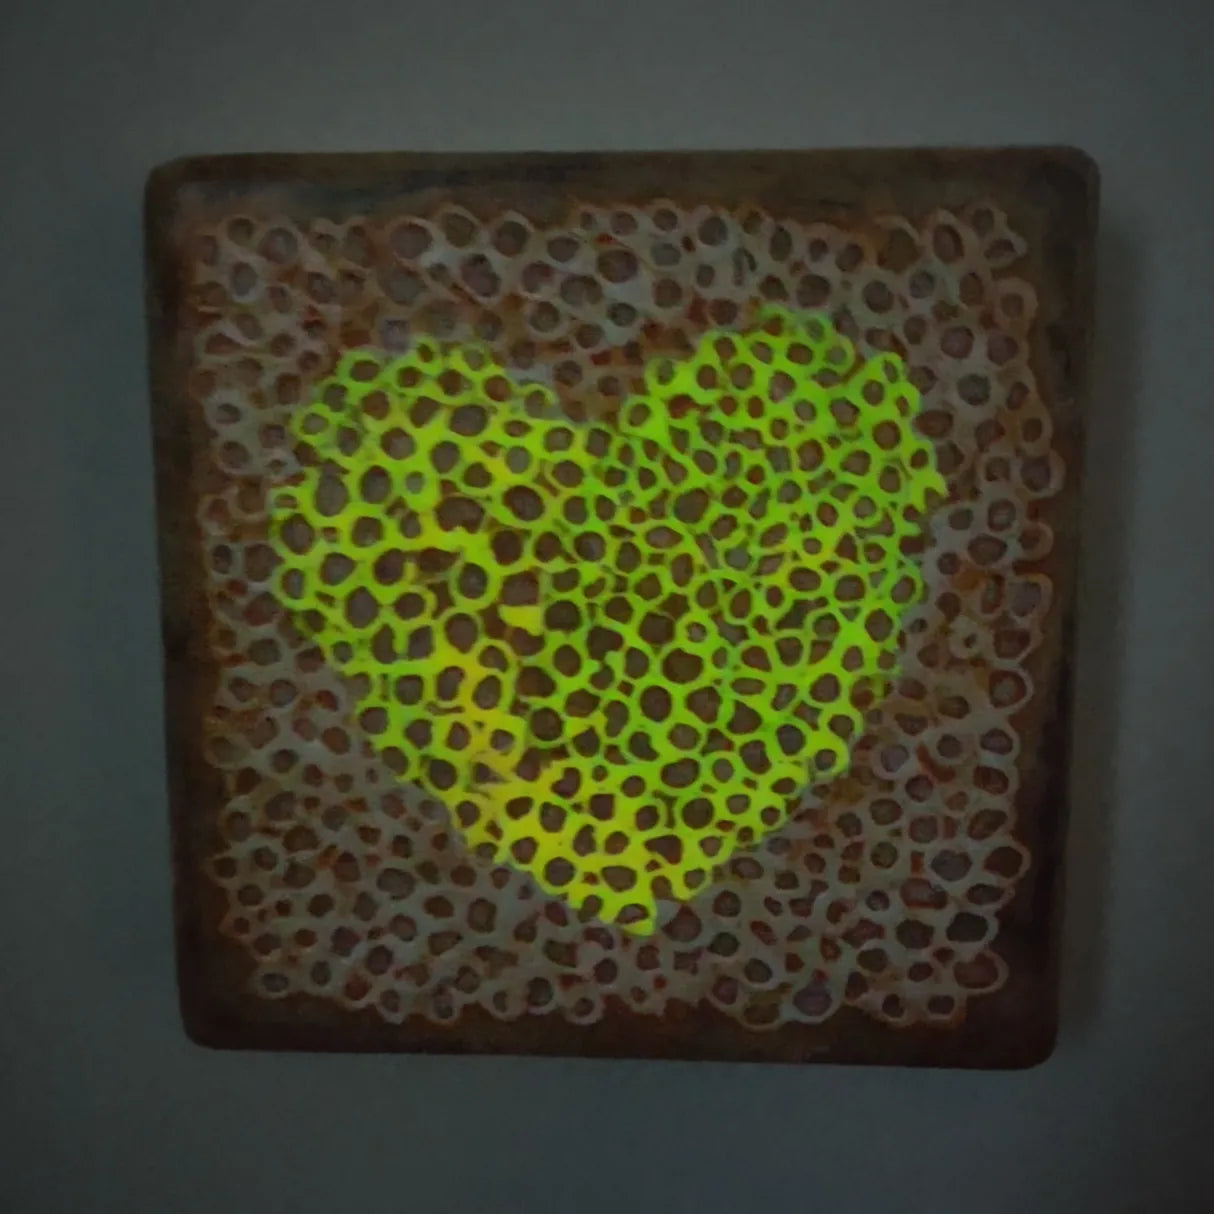 Heart in Texture Experiment - 9x9